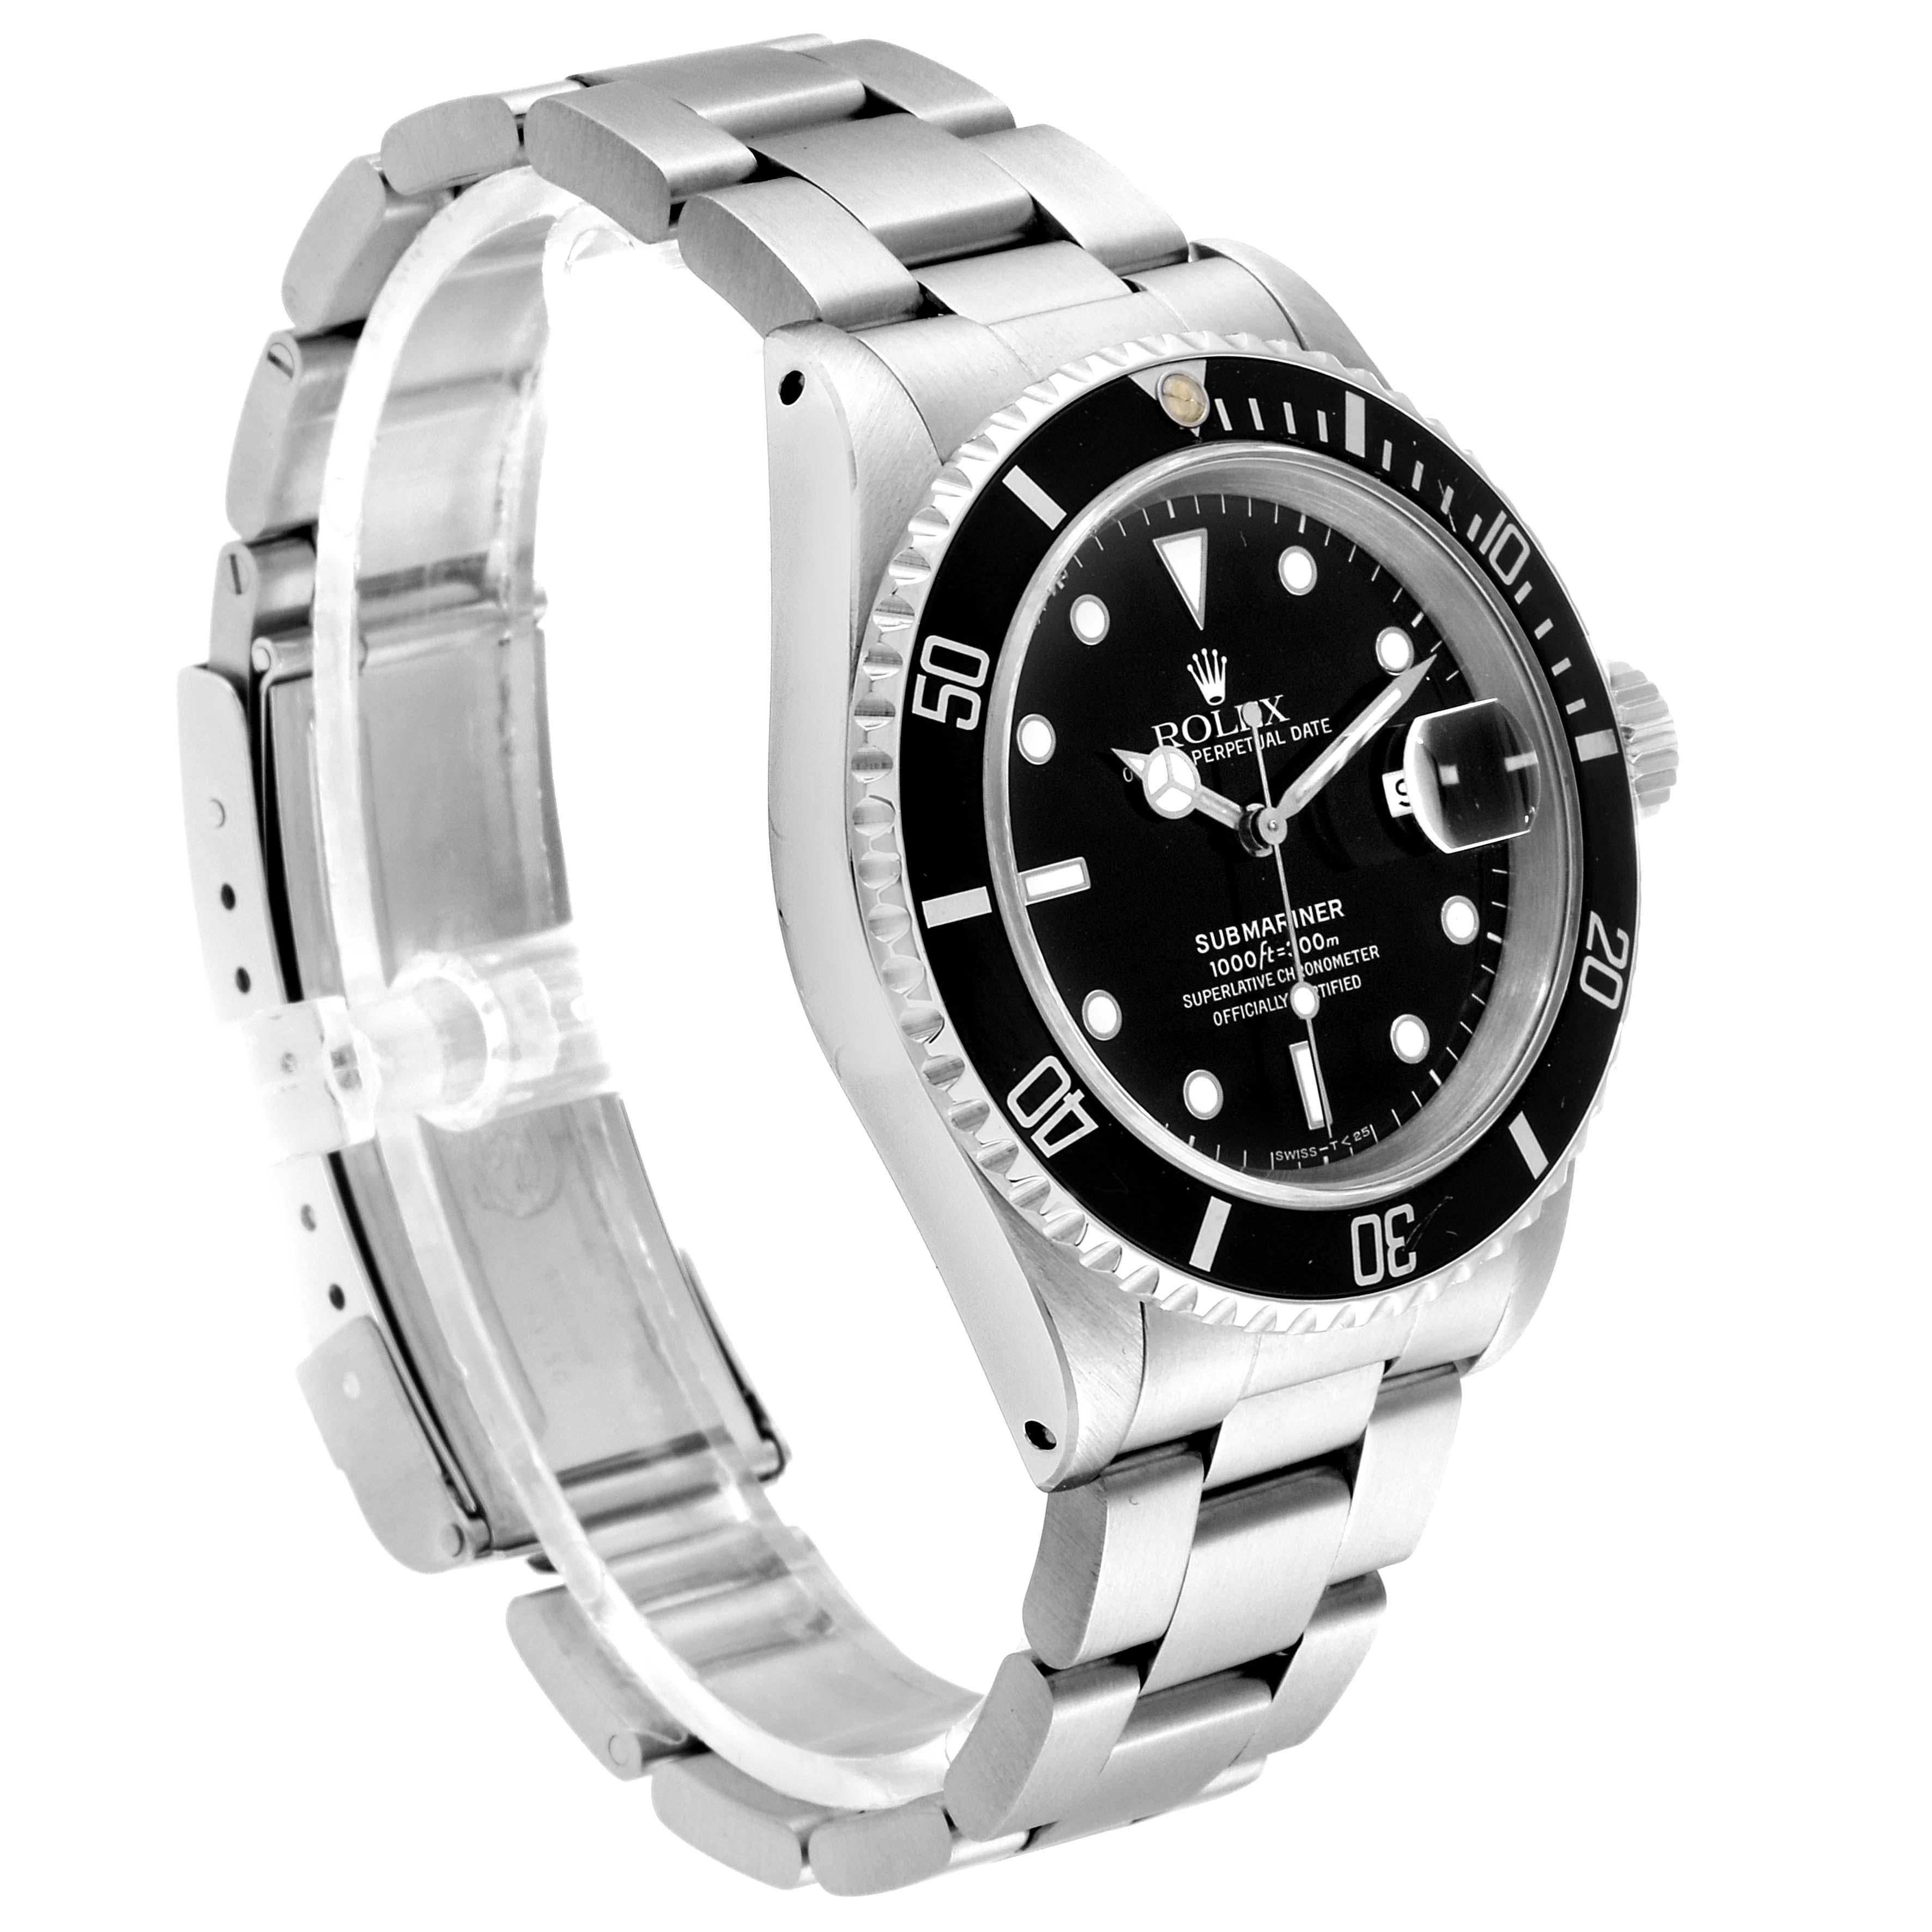 Rolex Submariner Black Dial Stainless Steel Men's Watch 16610 In Excellent Condition For Sale In Atlanta, GA